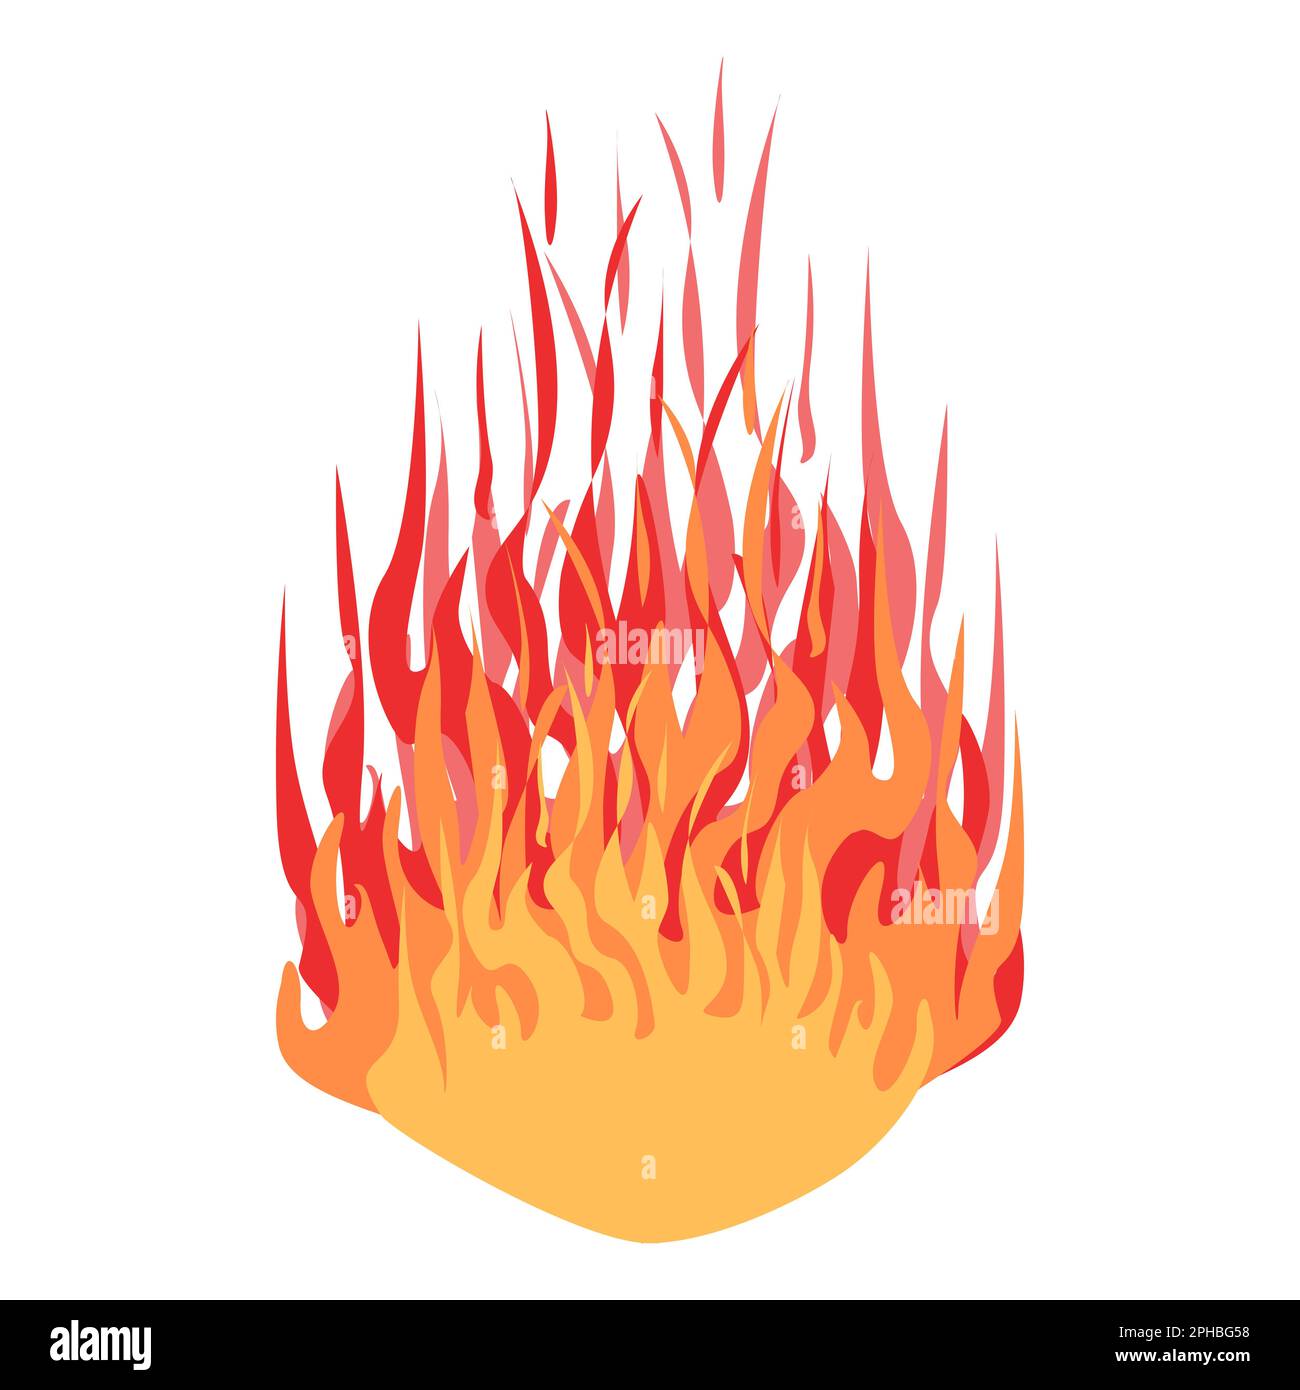 Fire. Big flame. Bright flaming elements. Colorful vector illustration on a white background. Stock Vector